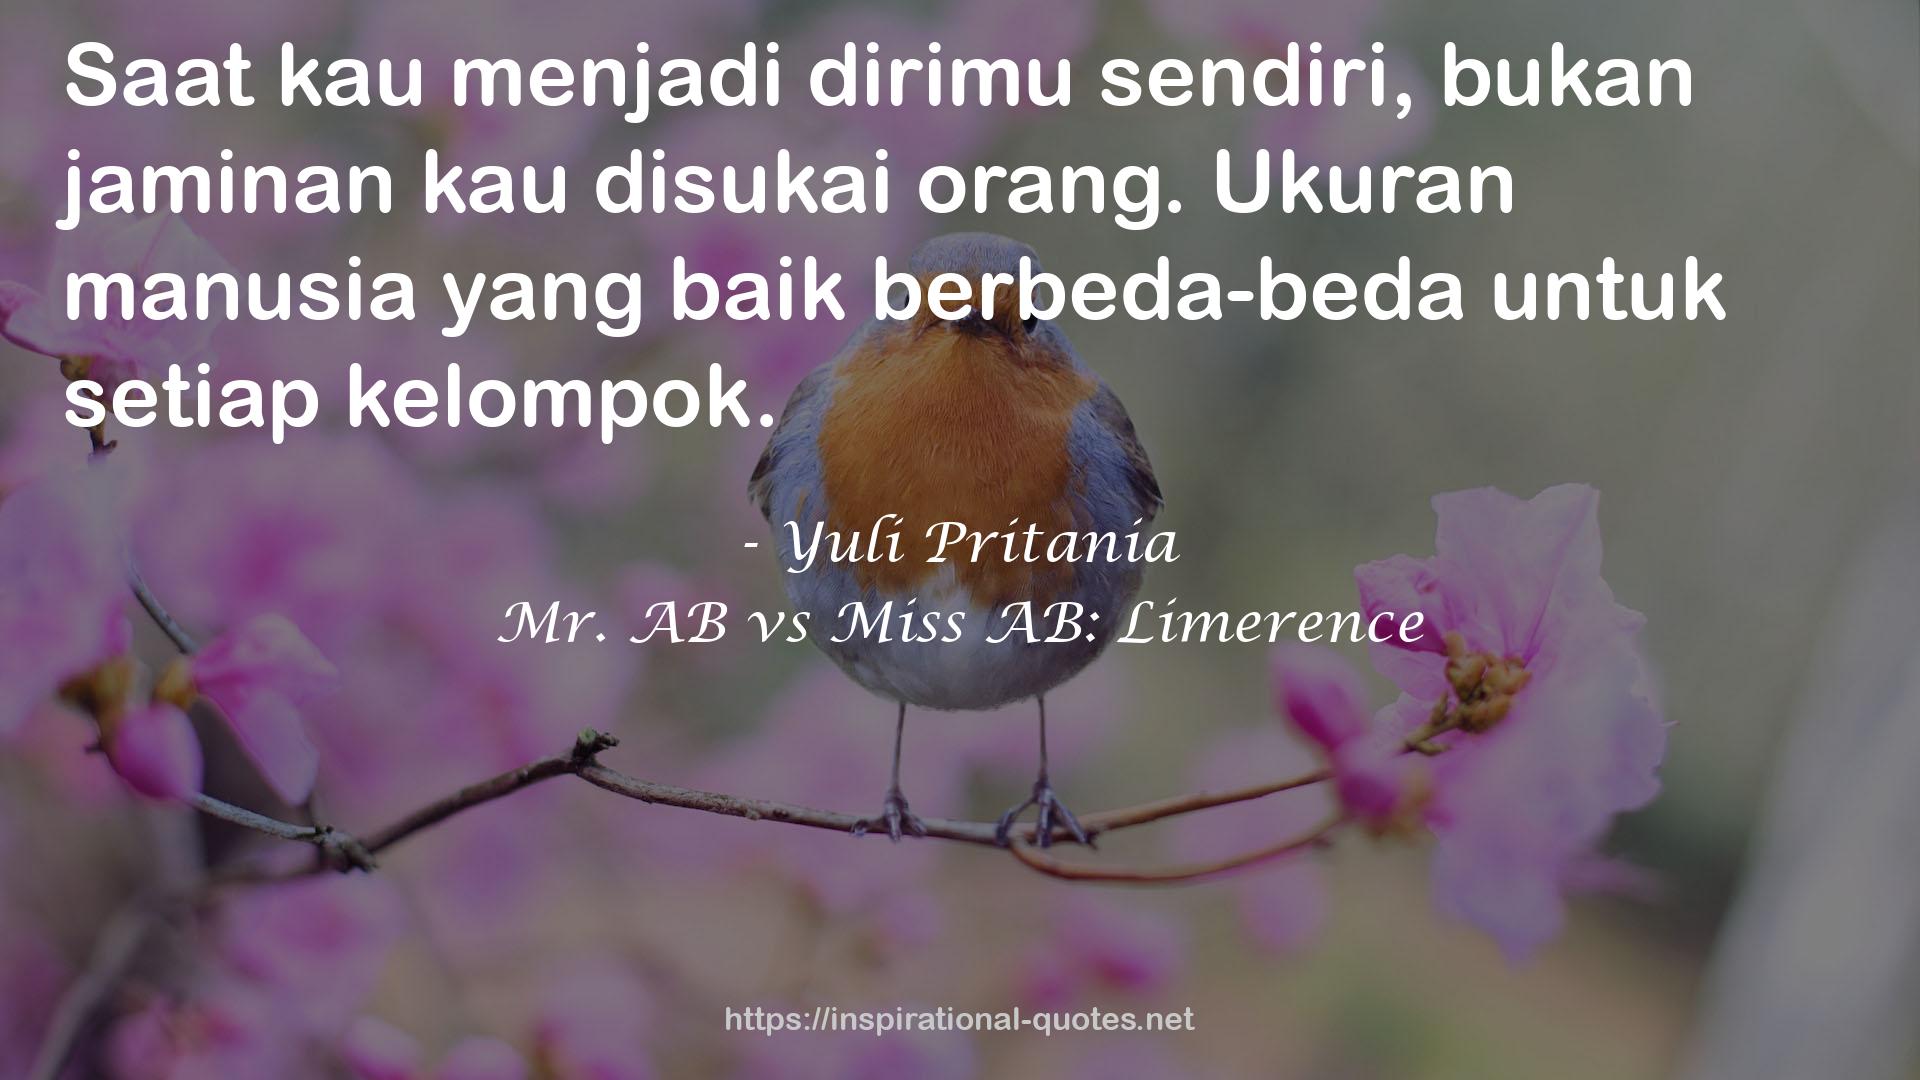 Mr. AB vs Miss AB: Limerence QUOTES